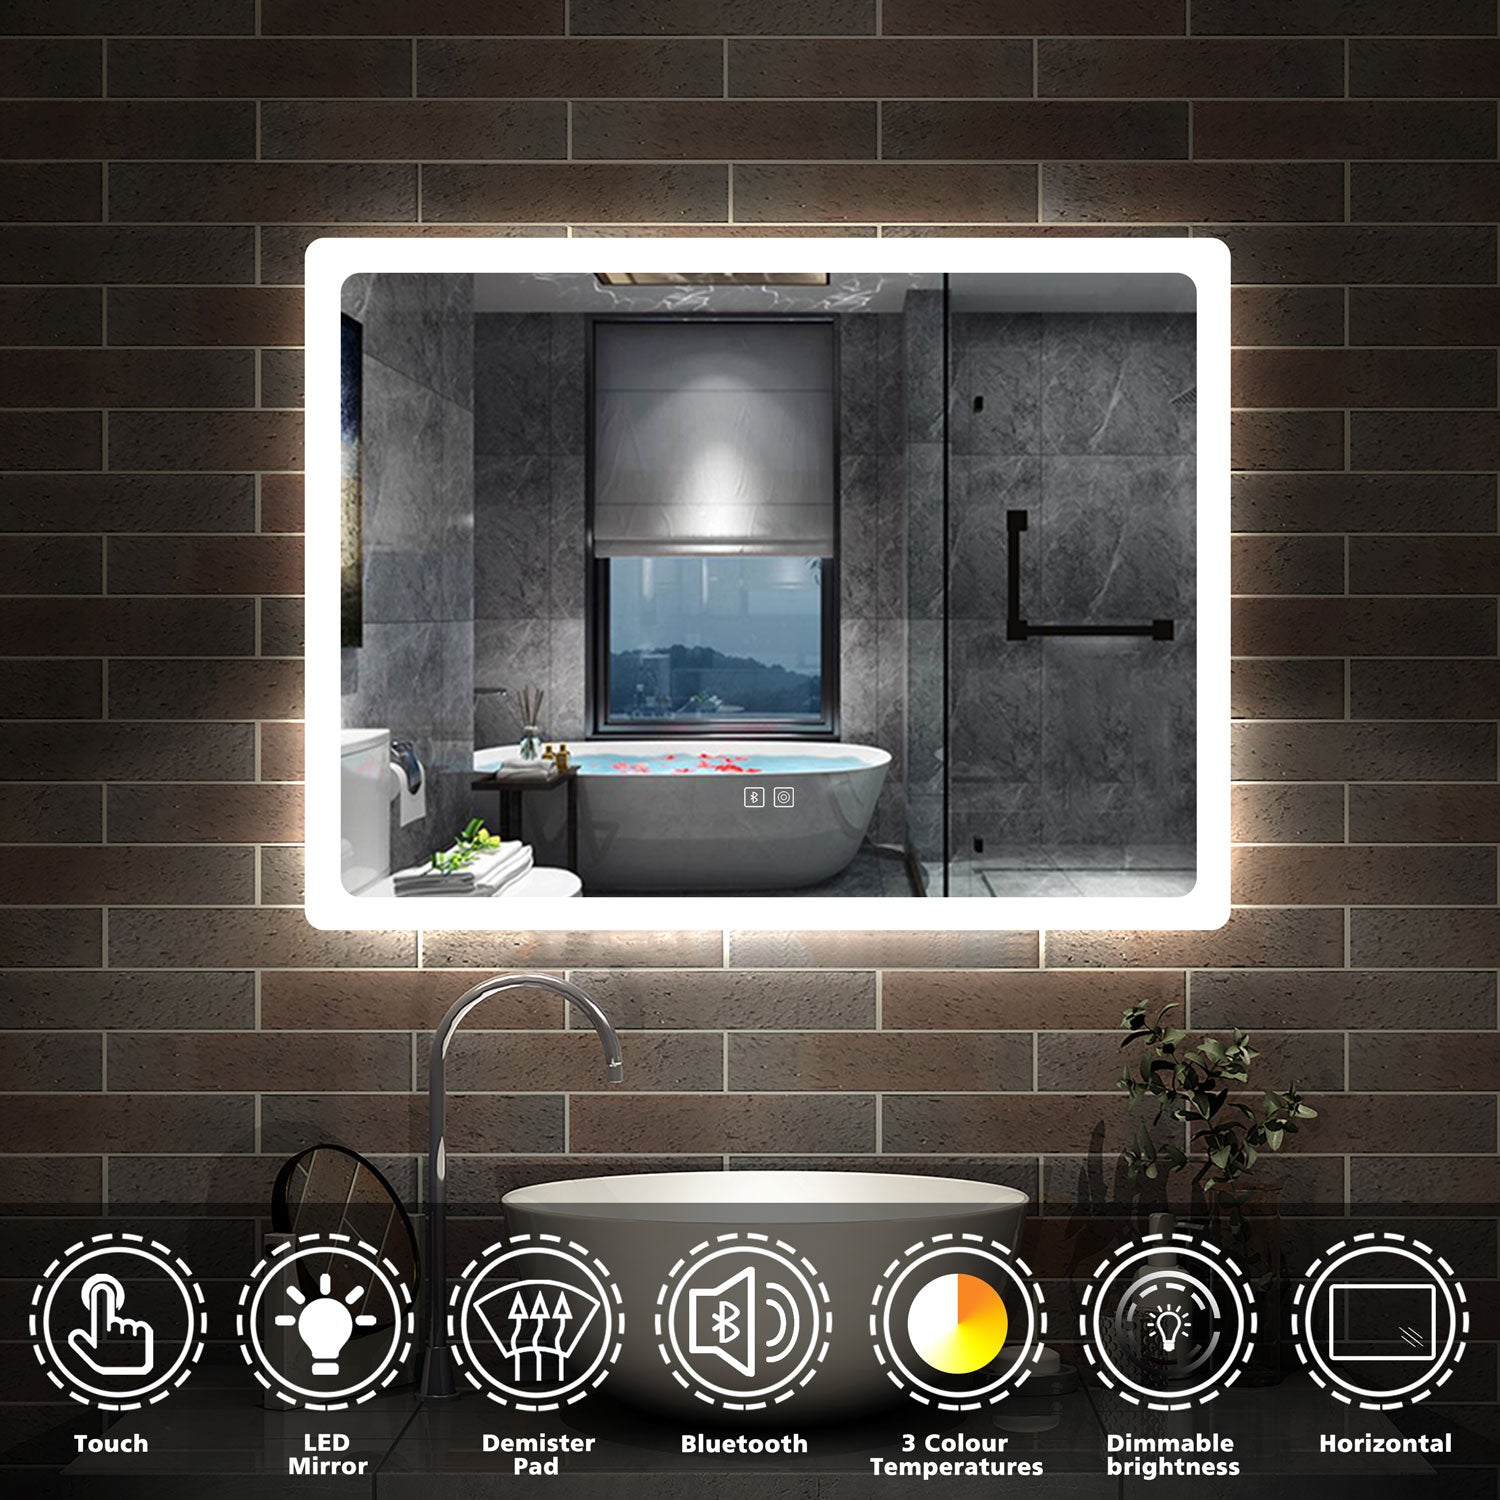 Bluetooth LED mirror with demister pad